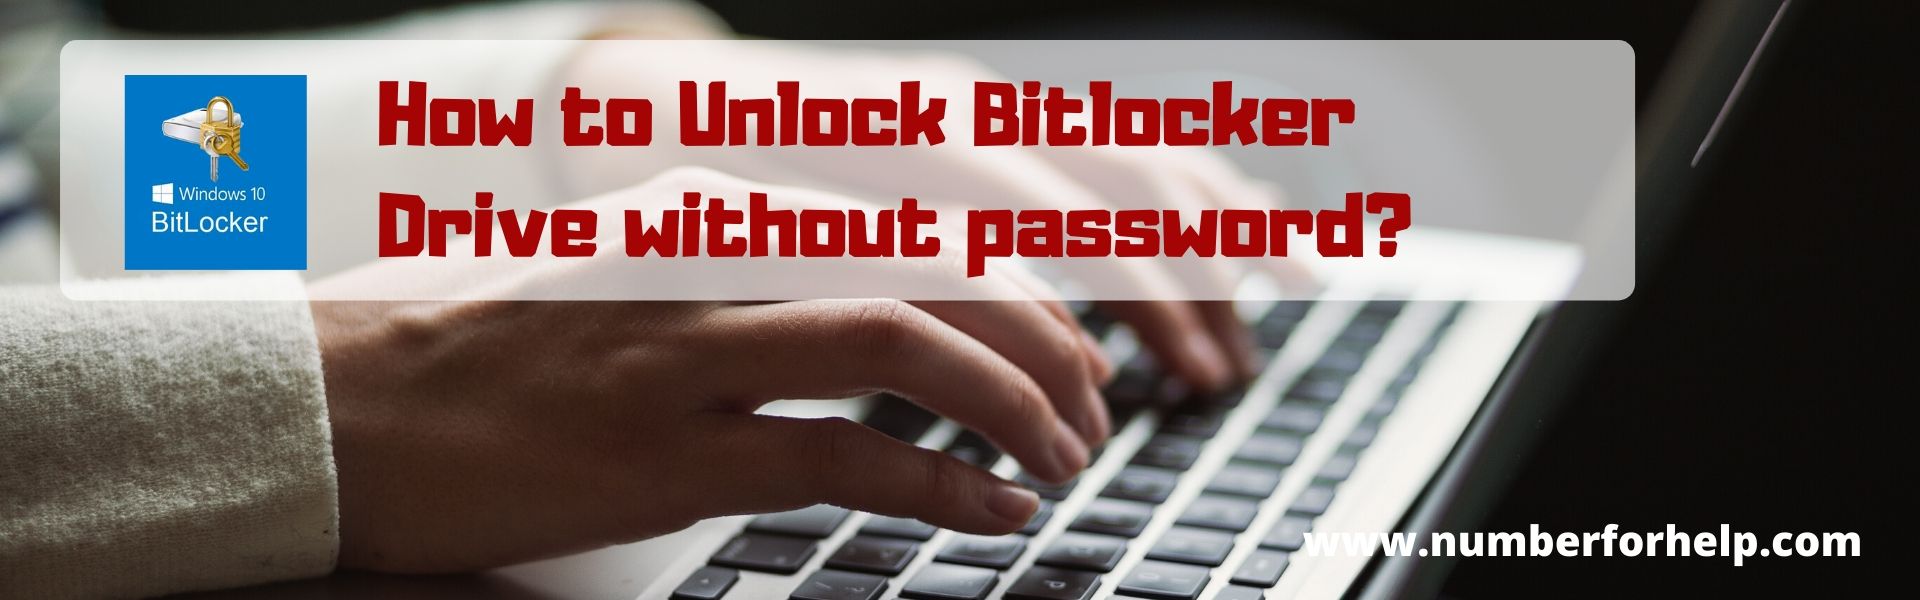 2020-01-22-01-22-09How to Unlock Bitlocker Drive without password